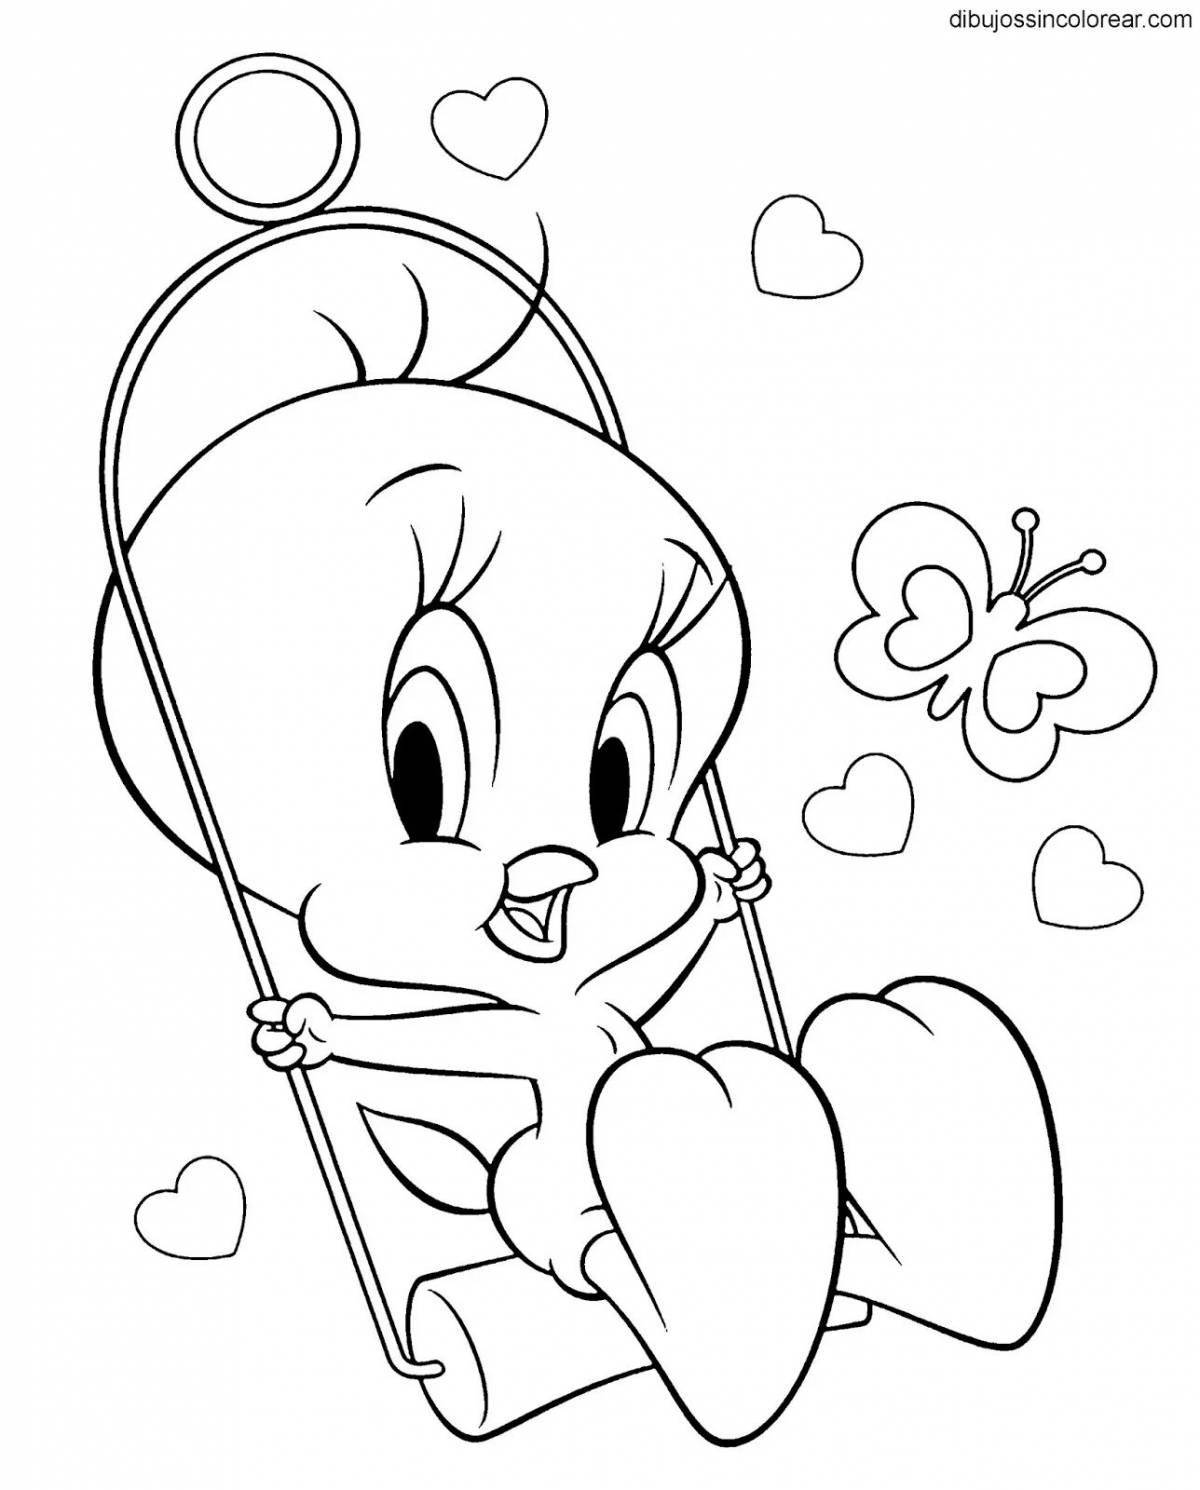 Whimsical disney coloring book for kids